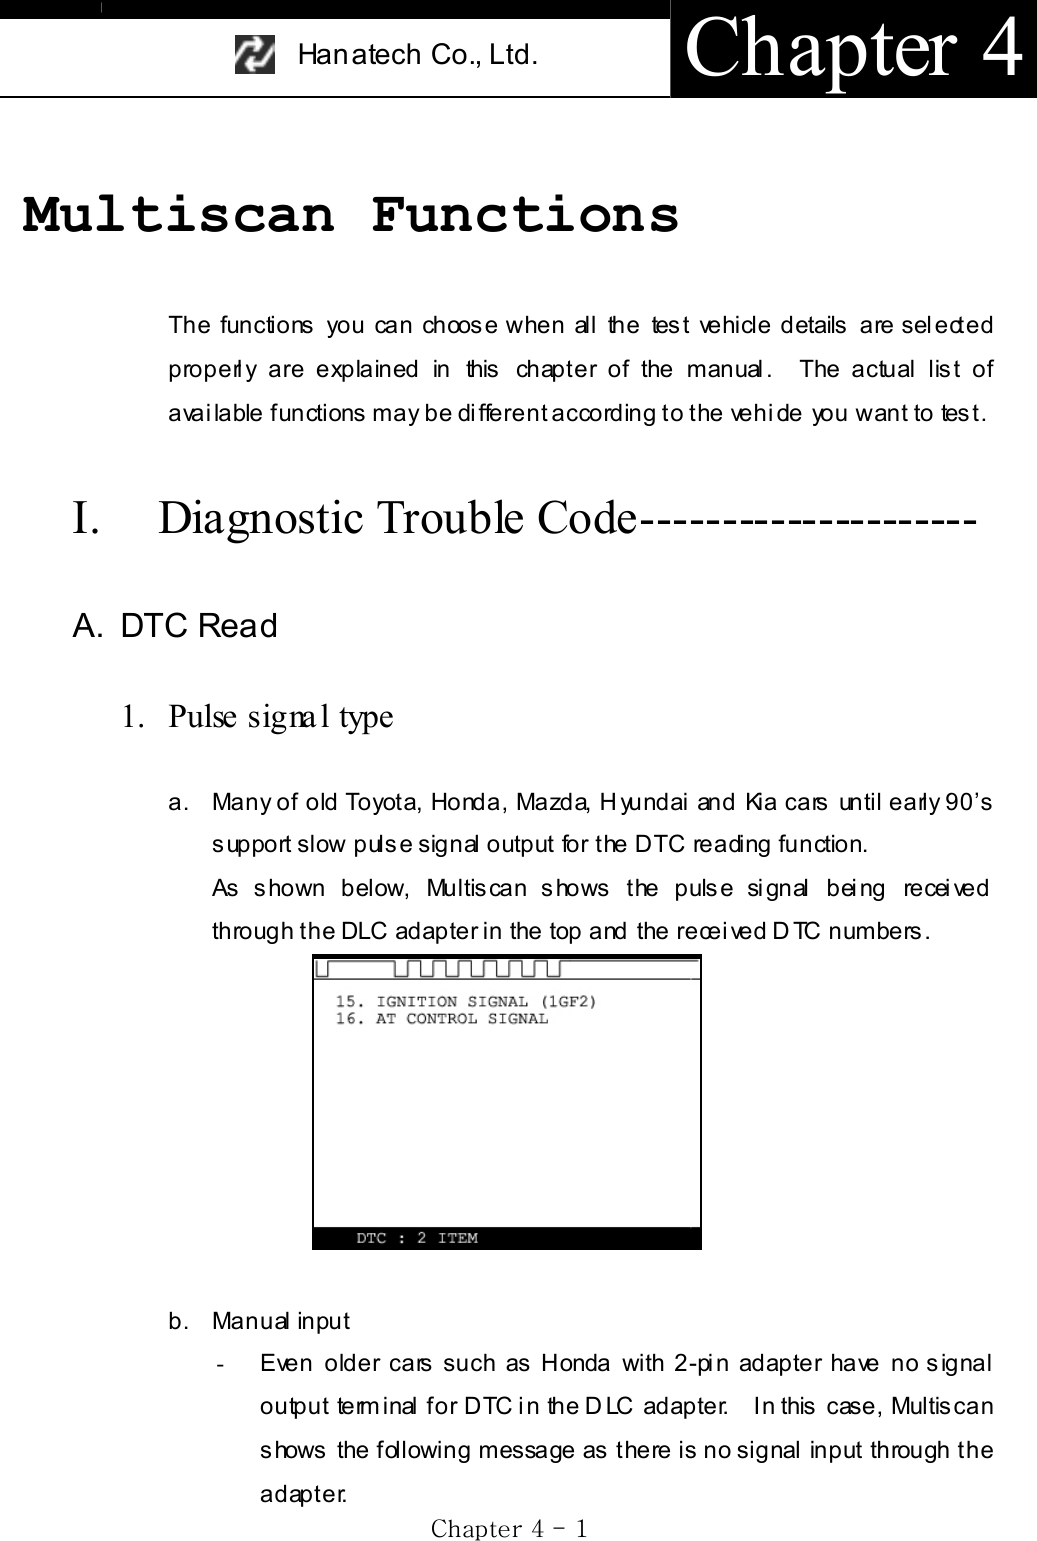 Han atech Co., Ltd.  Chapter 4 GjG[GTG XGMultiscan FunctionsThe functions you can choose when all the test vehicle details are selected properly are explained in this chapter of the manual.  The actual list of available functions may be different according to the vehicle you want to test.   I. Diagnostic Trouble Code--------------------- A. DTC Read 1. Pulse signa l type a.  Many of old Toyota, Honda, Mazda, Hyundai and Kia cars until early 90’s support slow pulse signal output for the DTC reading function. As shown below, Multiscan shows the pulse signal being received through the DLC adapter in the top and the received DTC numbers. b. Manual input -Even older cars such as Honda with 2-pin adapter have no signal output terminal for DTC in the DLC adapter.   In this case, Multiscan shows the following message as there is no signal input through the adapter. 